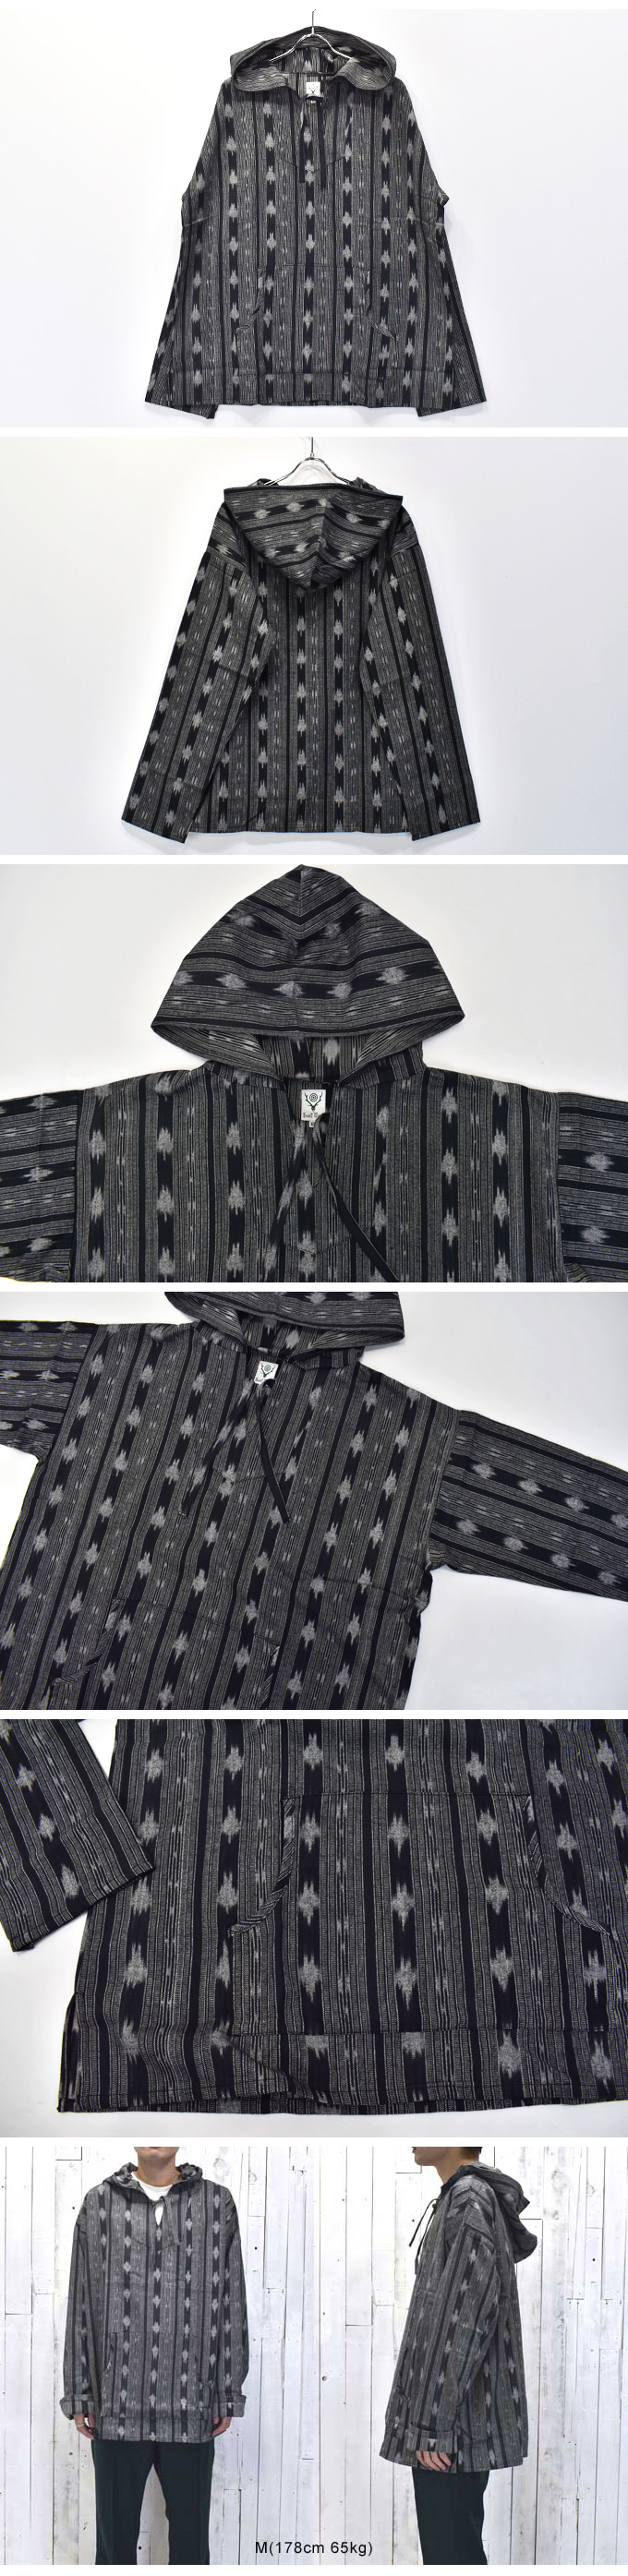 South2 West8 Mexican Parka (Cotton Cloth / Ikat Pattern)【価格はお問い合わせください。】